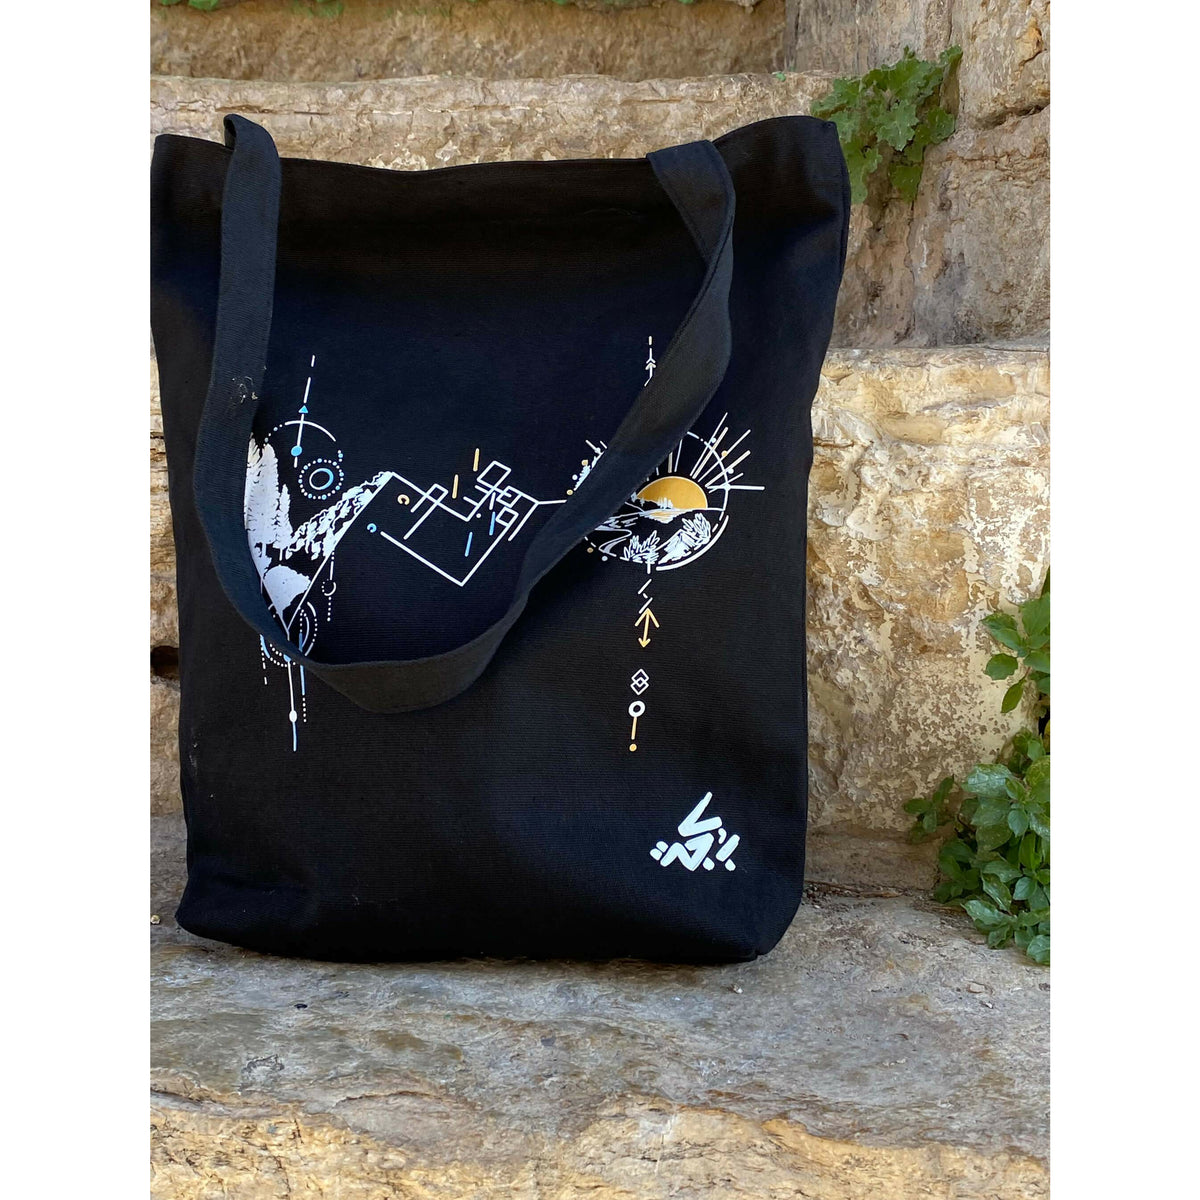 Day and Night (Arabic Calligraphy) Black Tote Bag